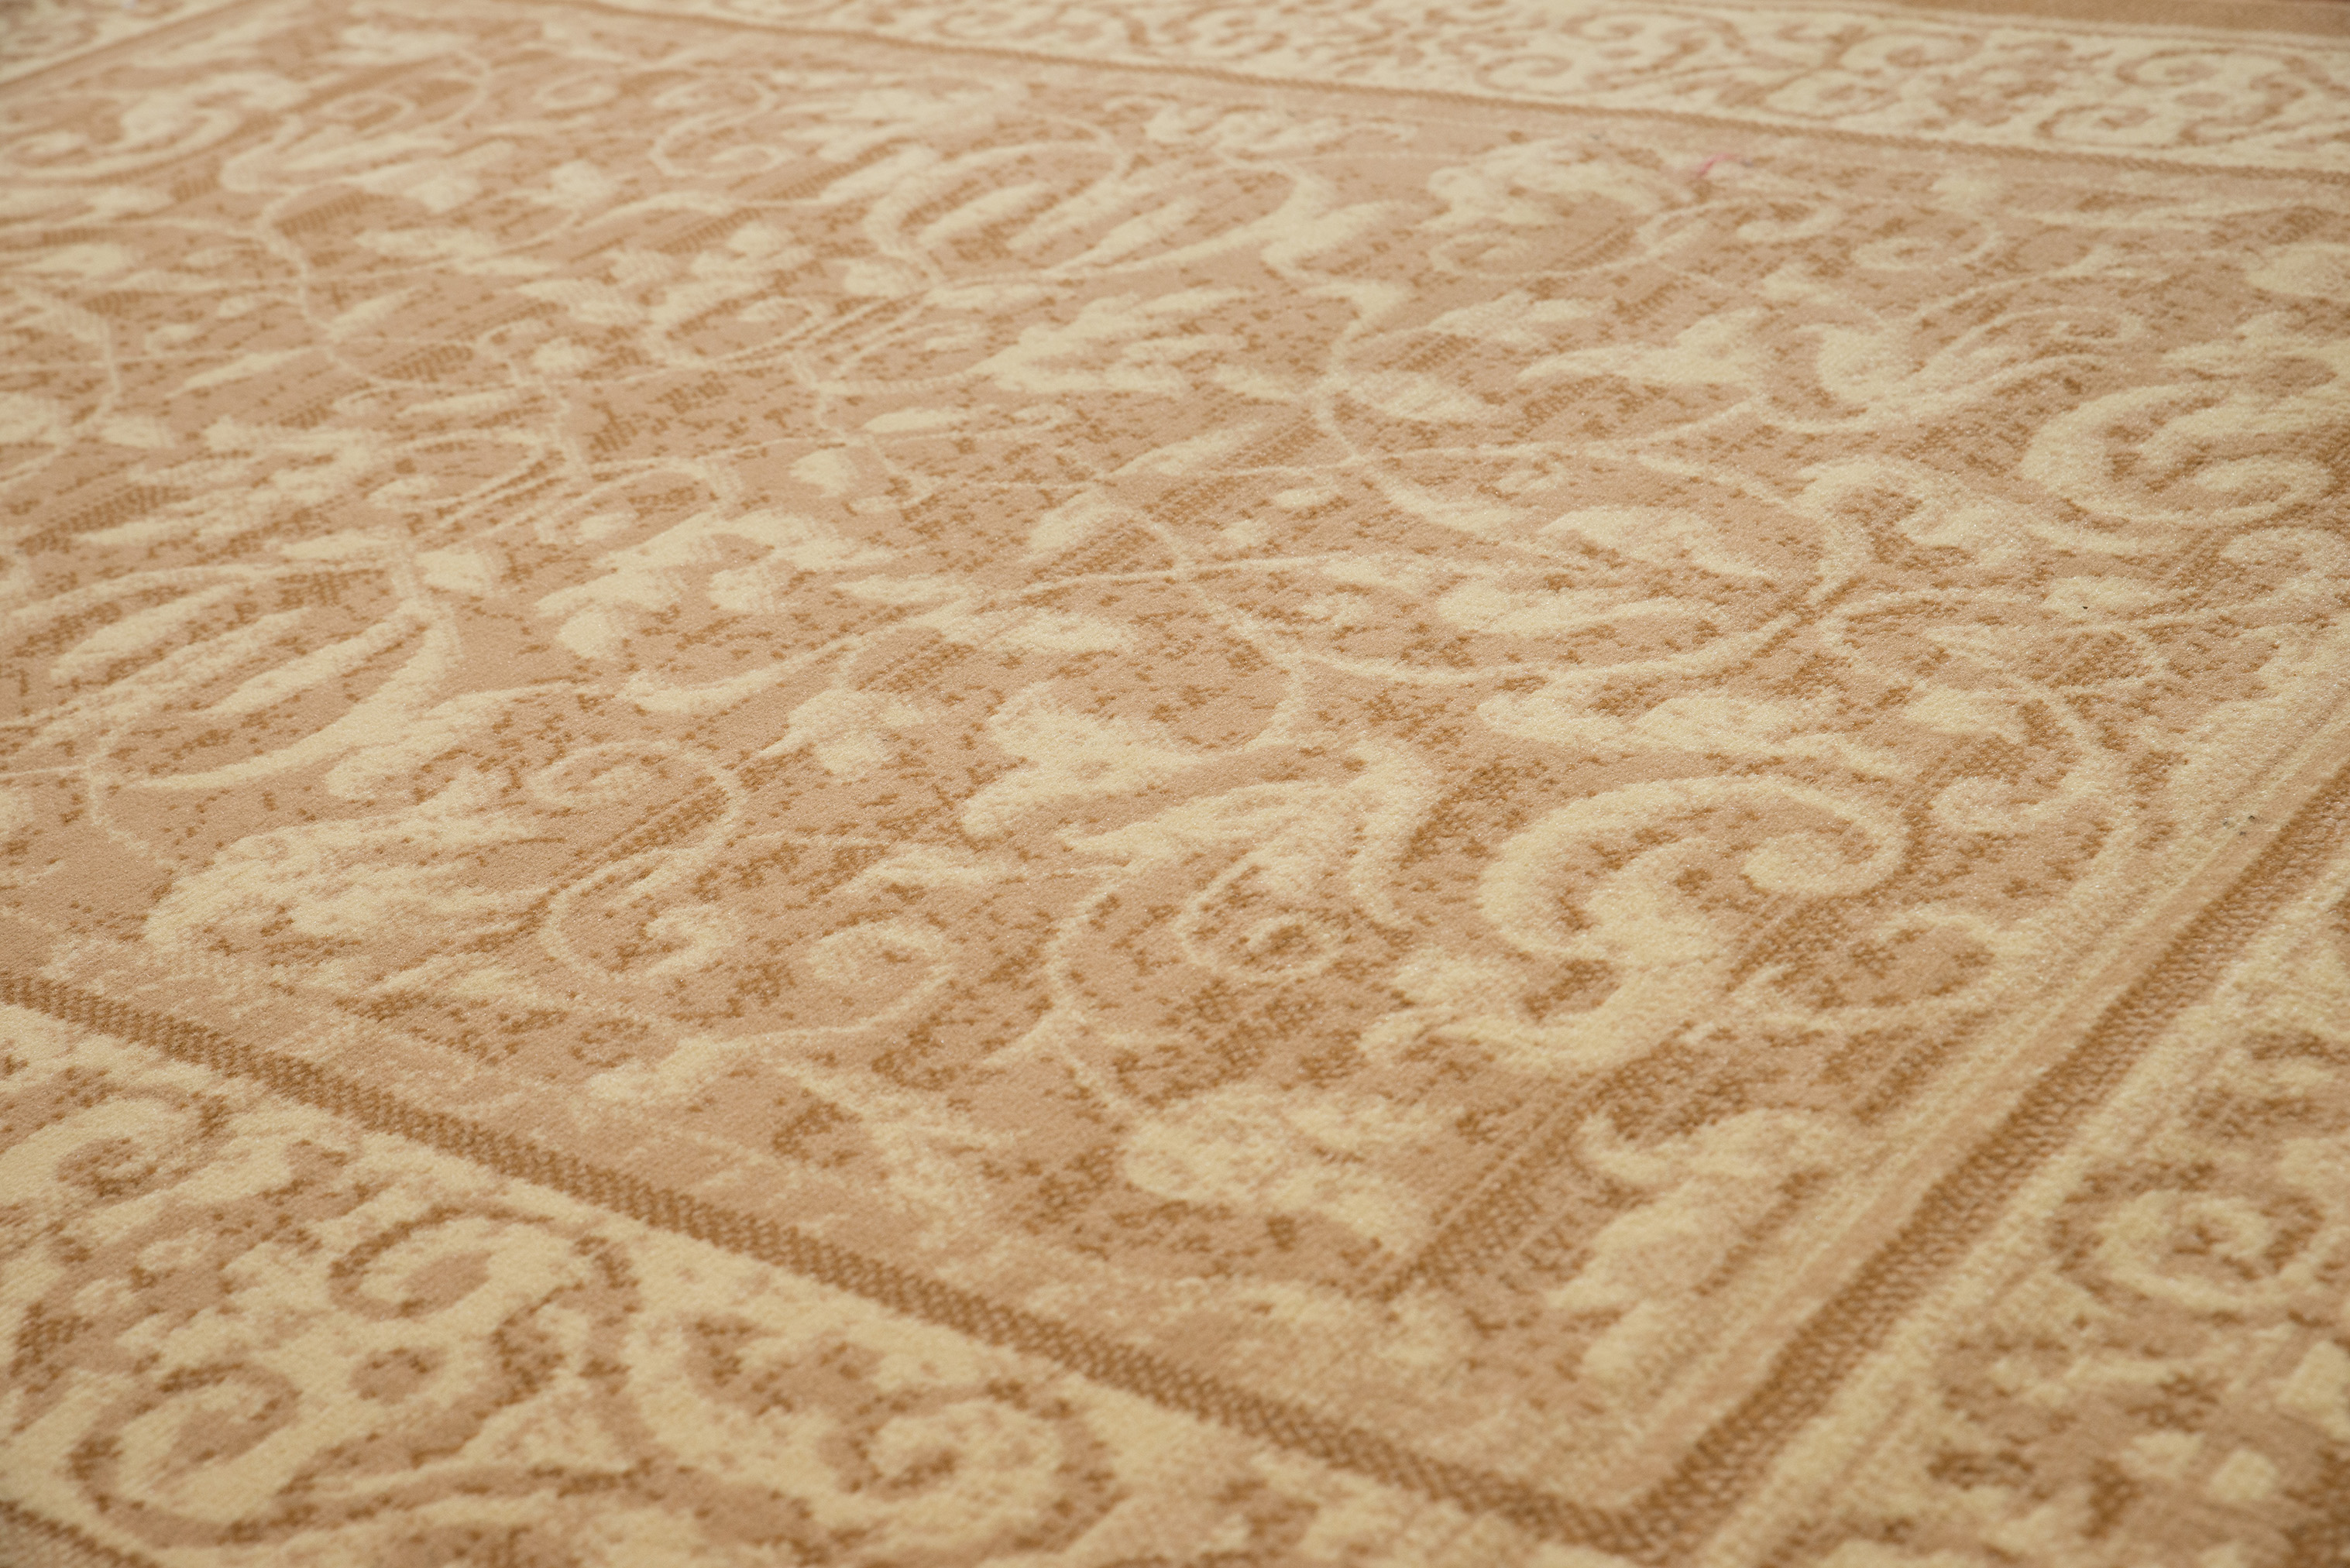 United Weavers Plaza Genevieve Accent Rug, Bordered Pattern, Beige, 1'11" X 3'3" - image 3 of 6